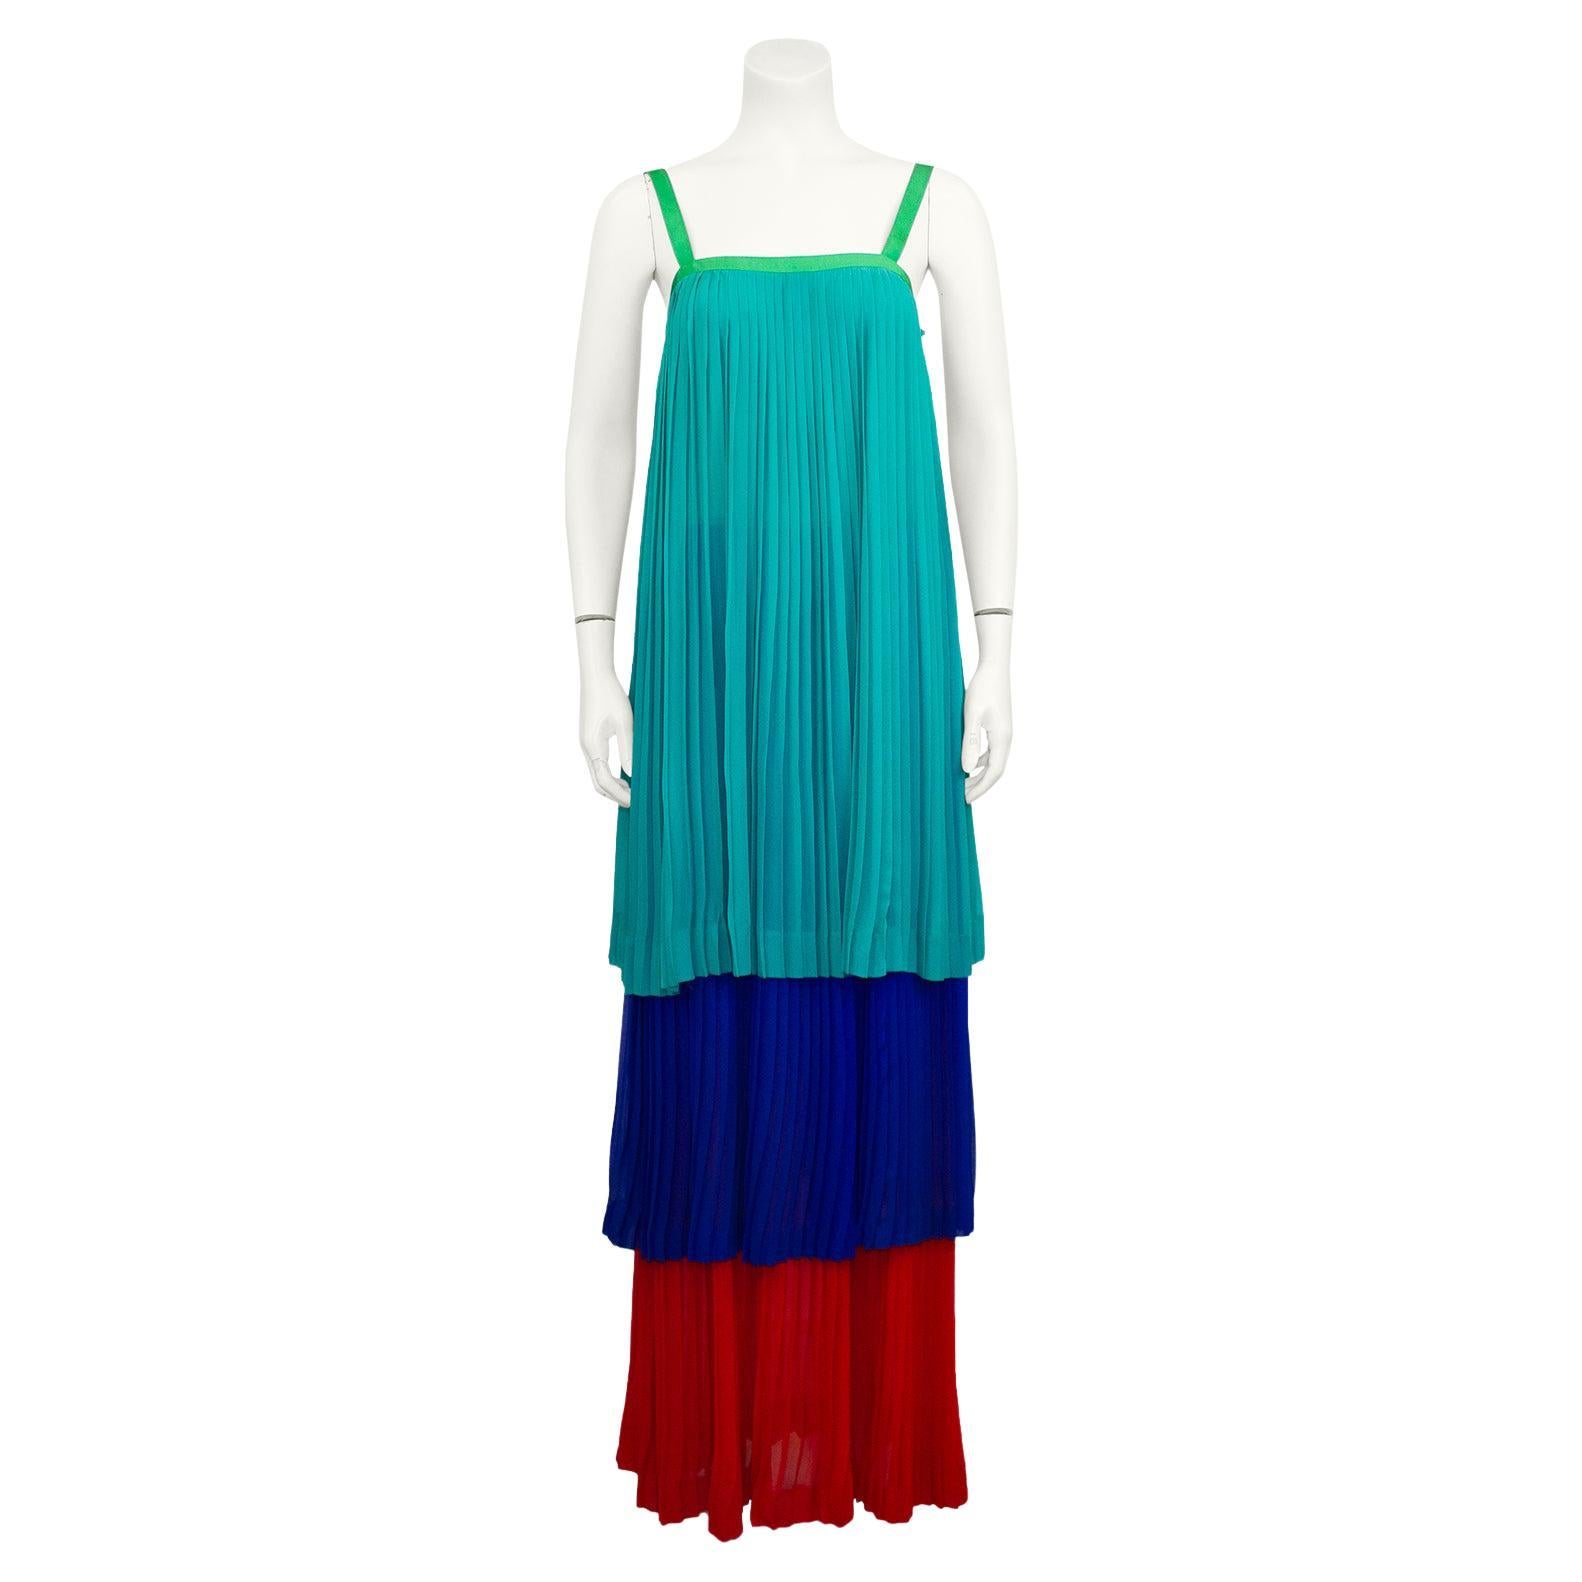 1978 Yves Saint Laurent Rive Gauche Pleated Tricolor Tiered Chiffon Gown For Sale